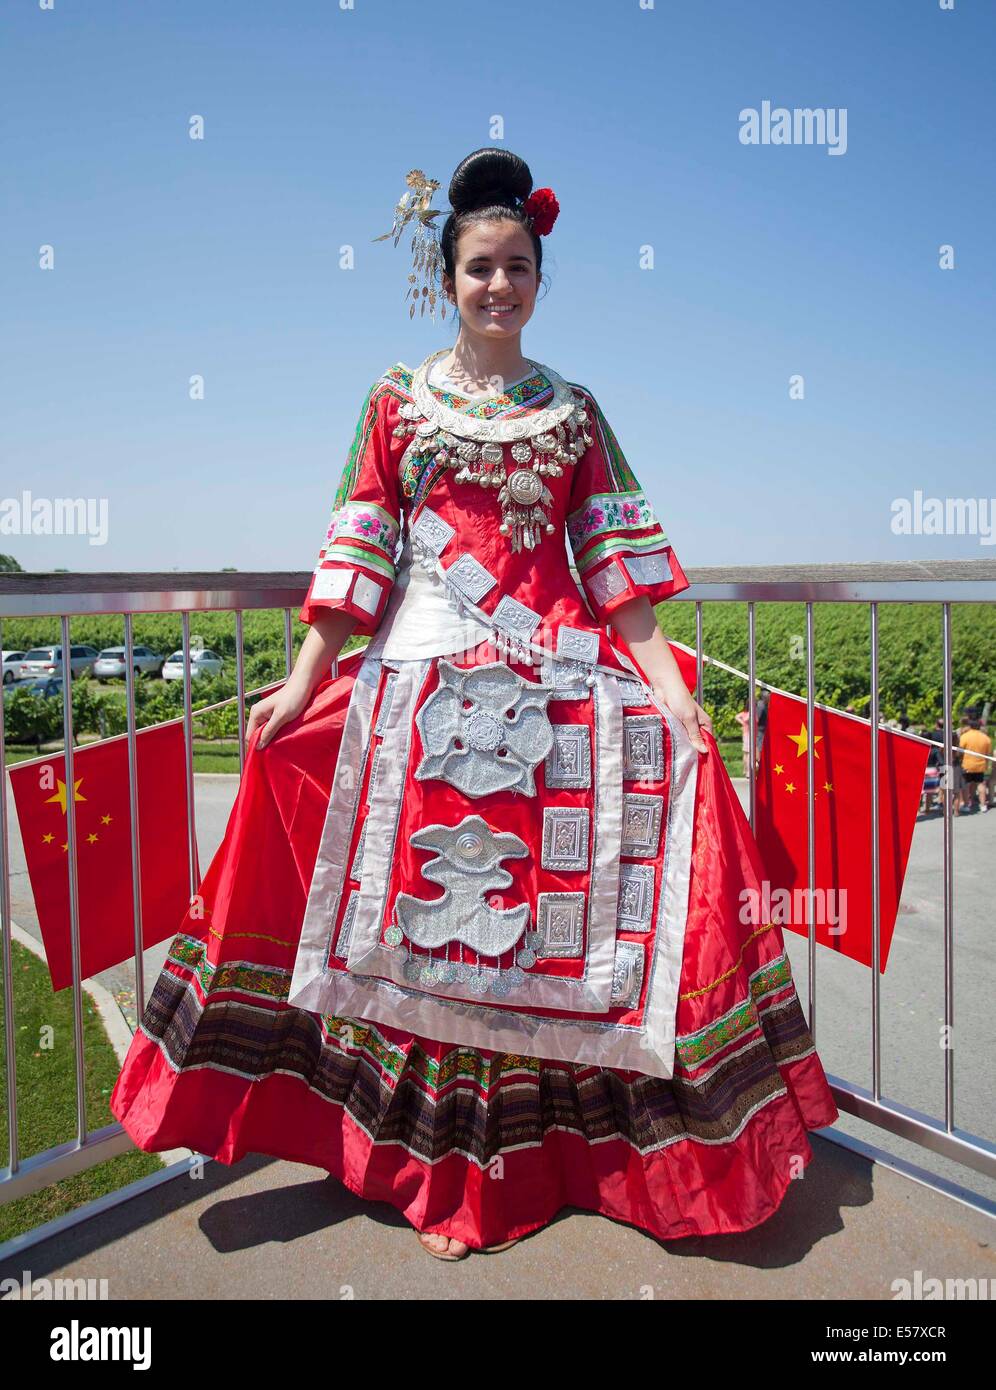 Toronto, Canada. 22nd July, 2014. A girl poses for photos wearing Miao  ethnic group traditional clothes during the "Colorful Guizhou Exhibition"  in the Town of Niagara-on-the-Lake, Ontario, Canada, July 22, 2014.  Featuring